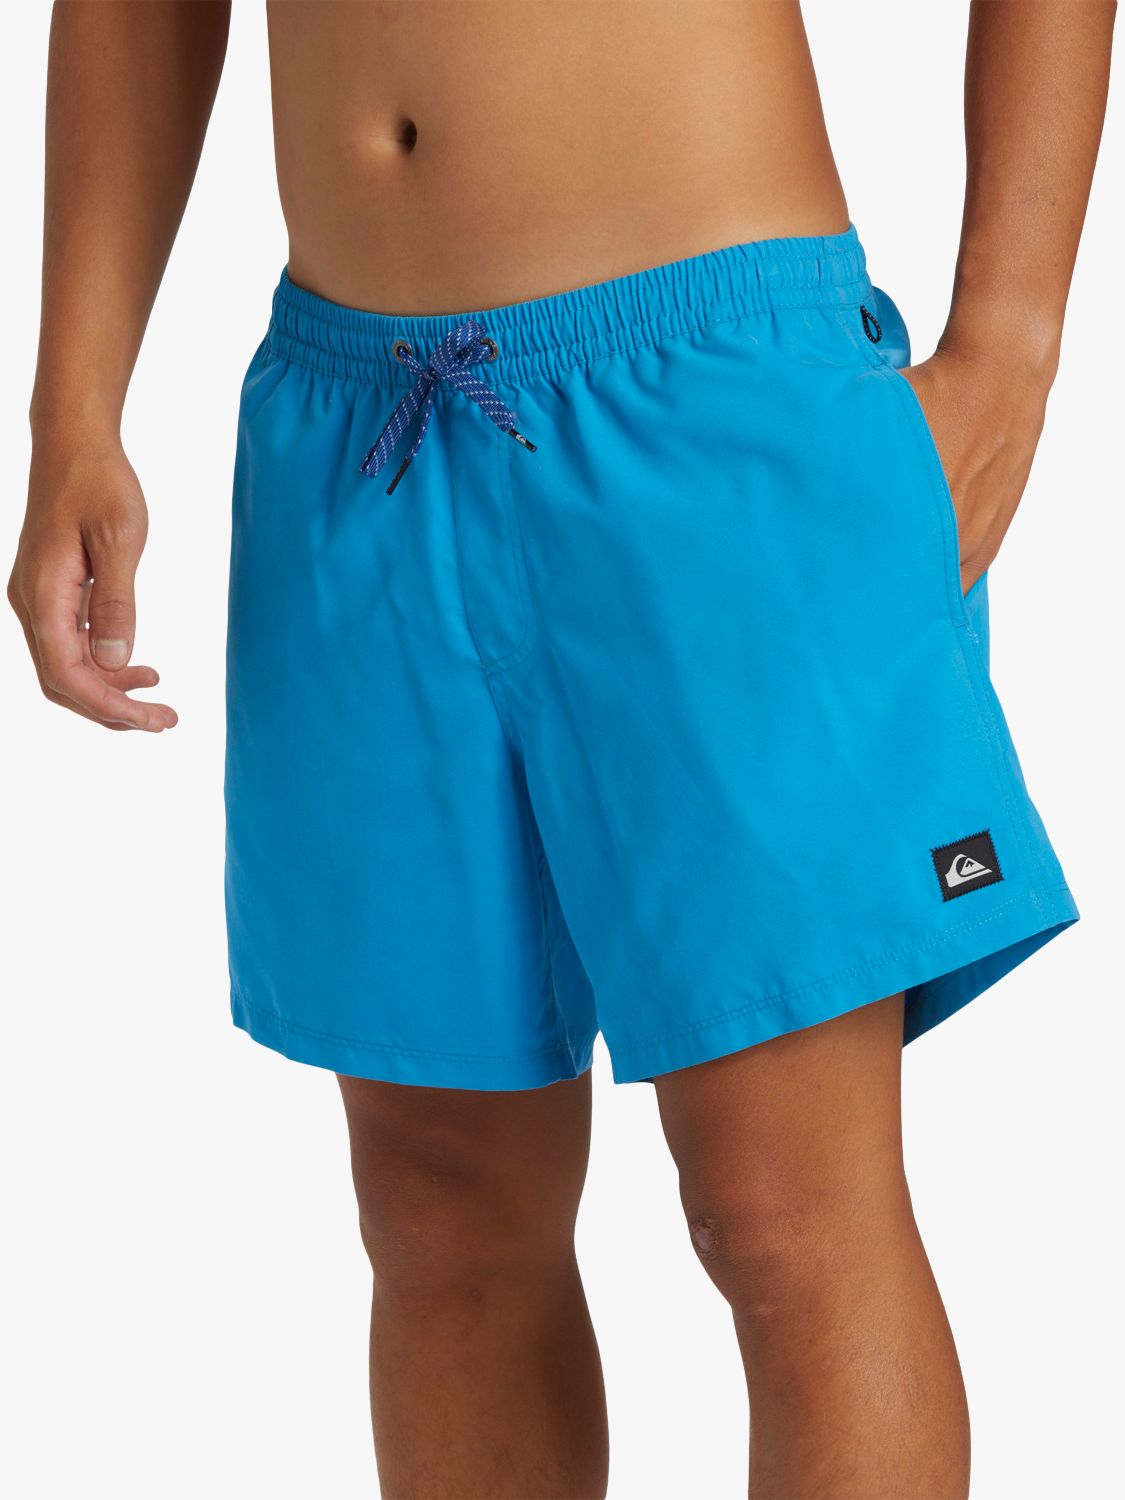 Buy Quiksilver Solid Volley Swim Shorts, Swedish Blue Online at johnlewis.com